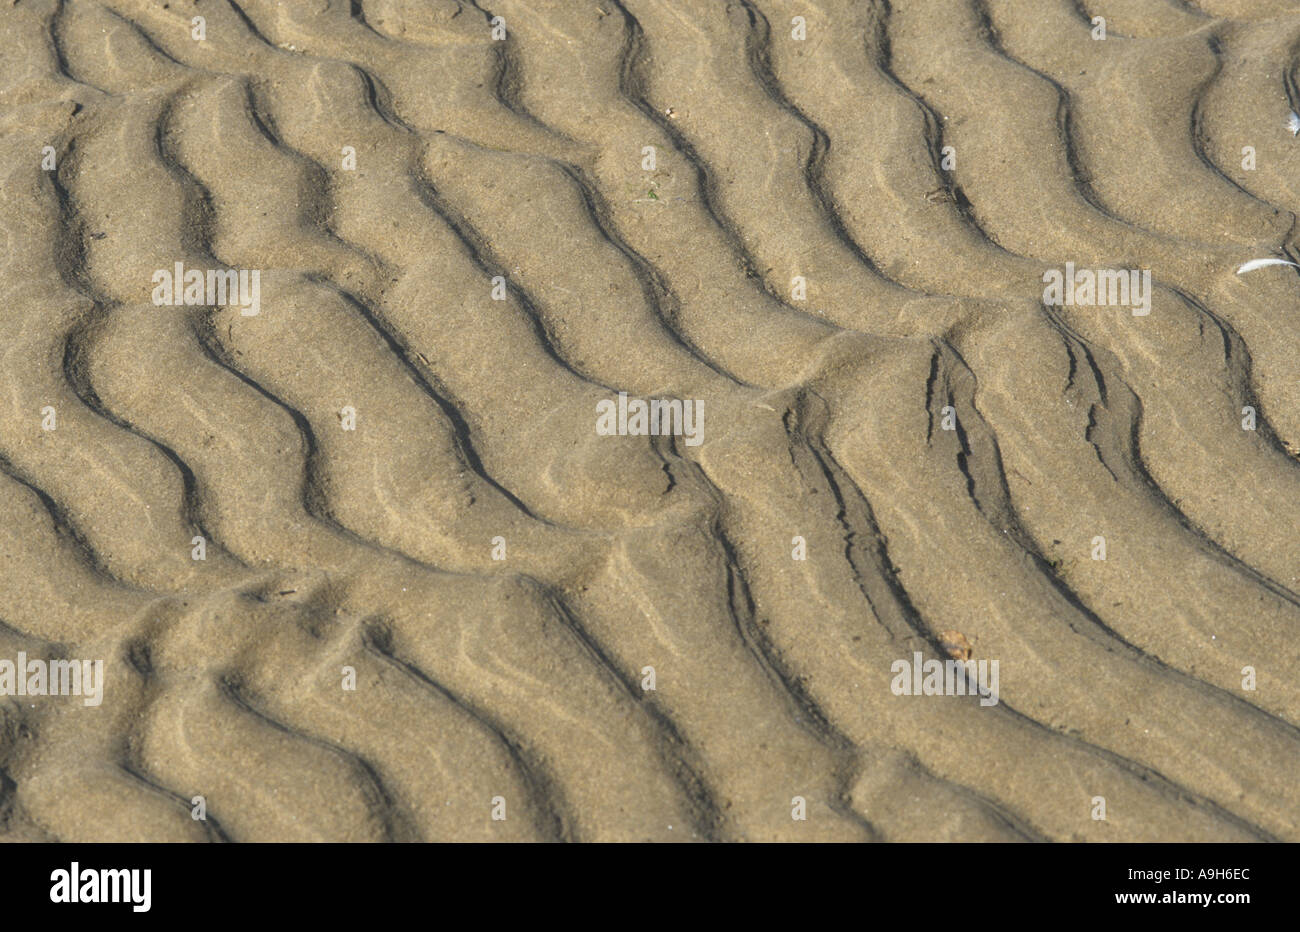 Sand Patterns Patterns left behind by sea beach Lytham St Annes Stock Photo